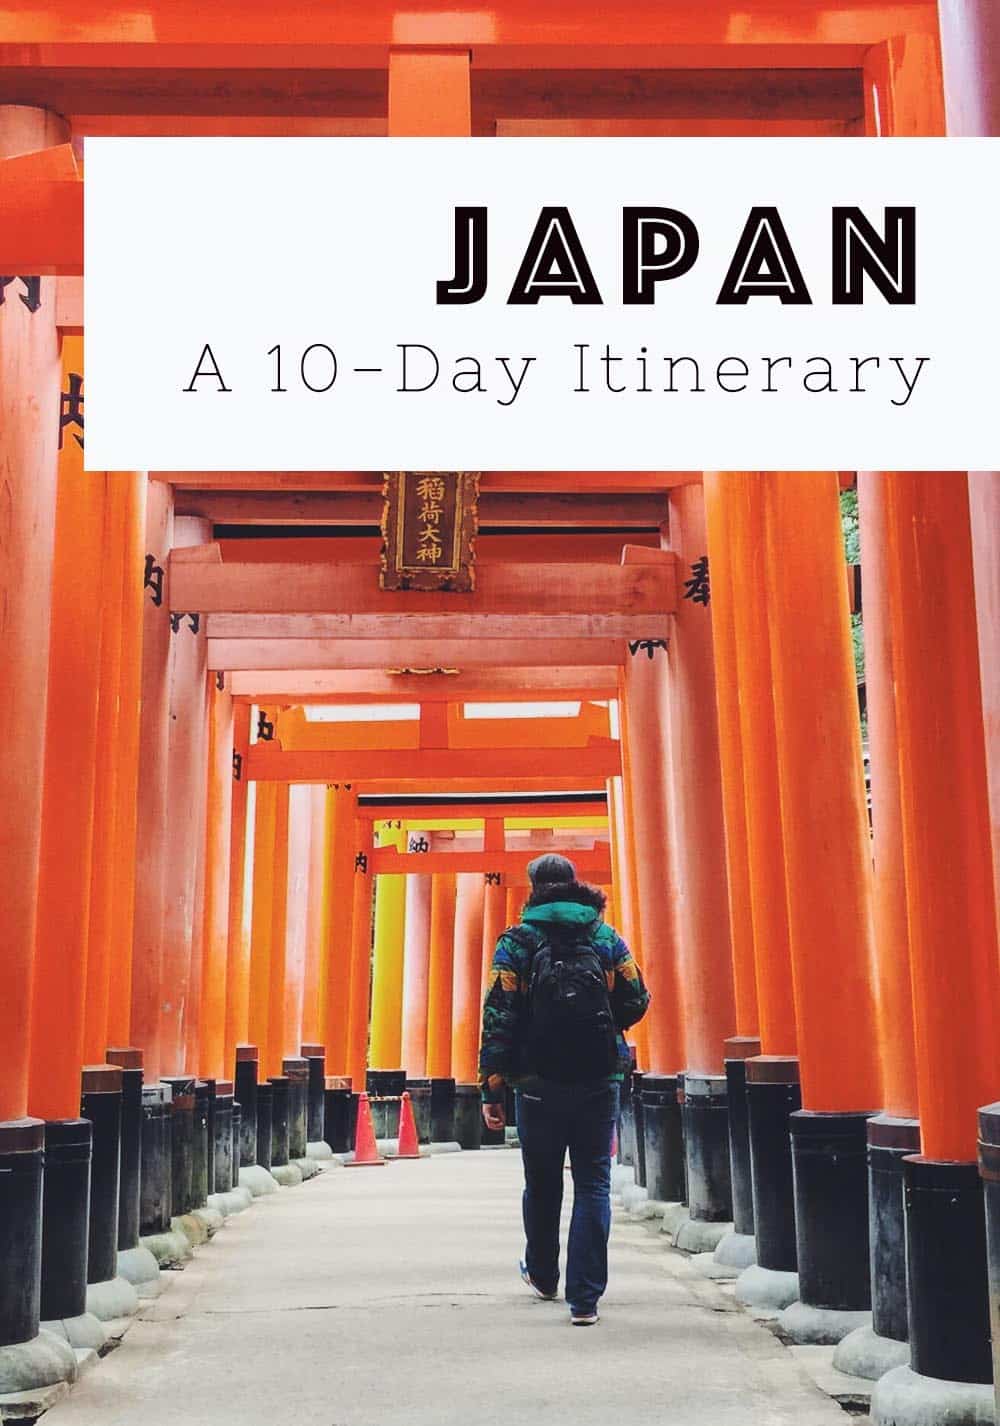 The Best Japan Itinerary How To Make The Most Of 10 Days In Japan